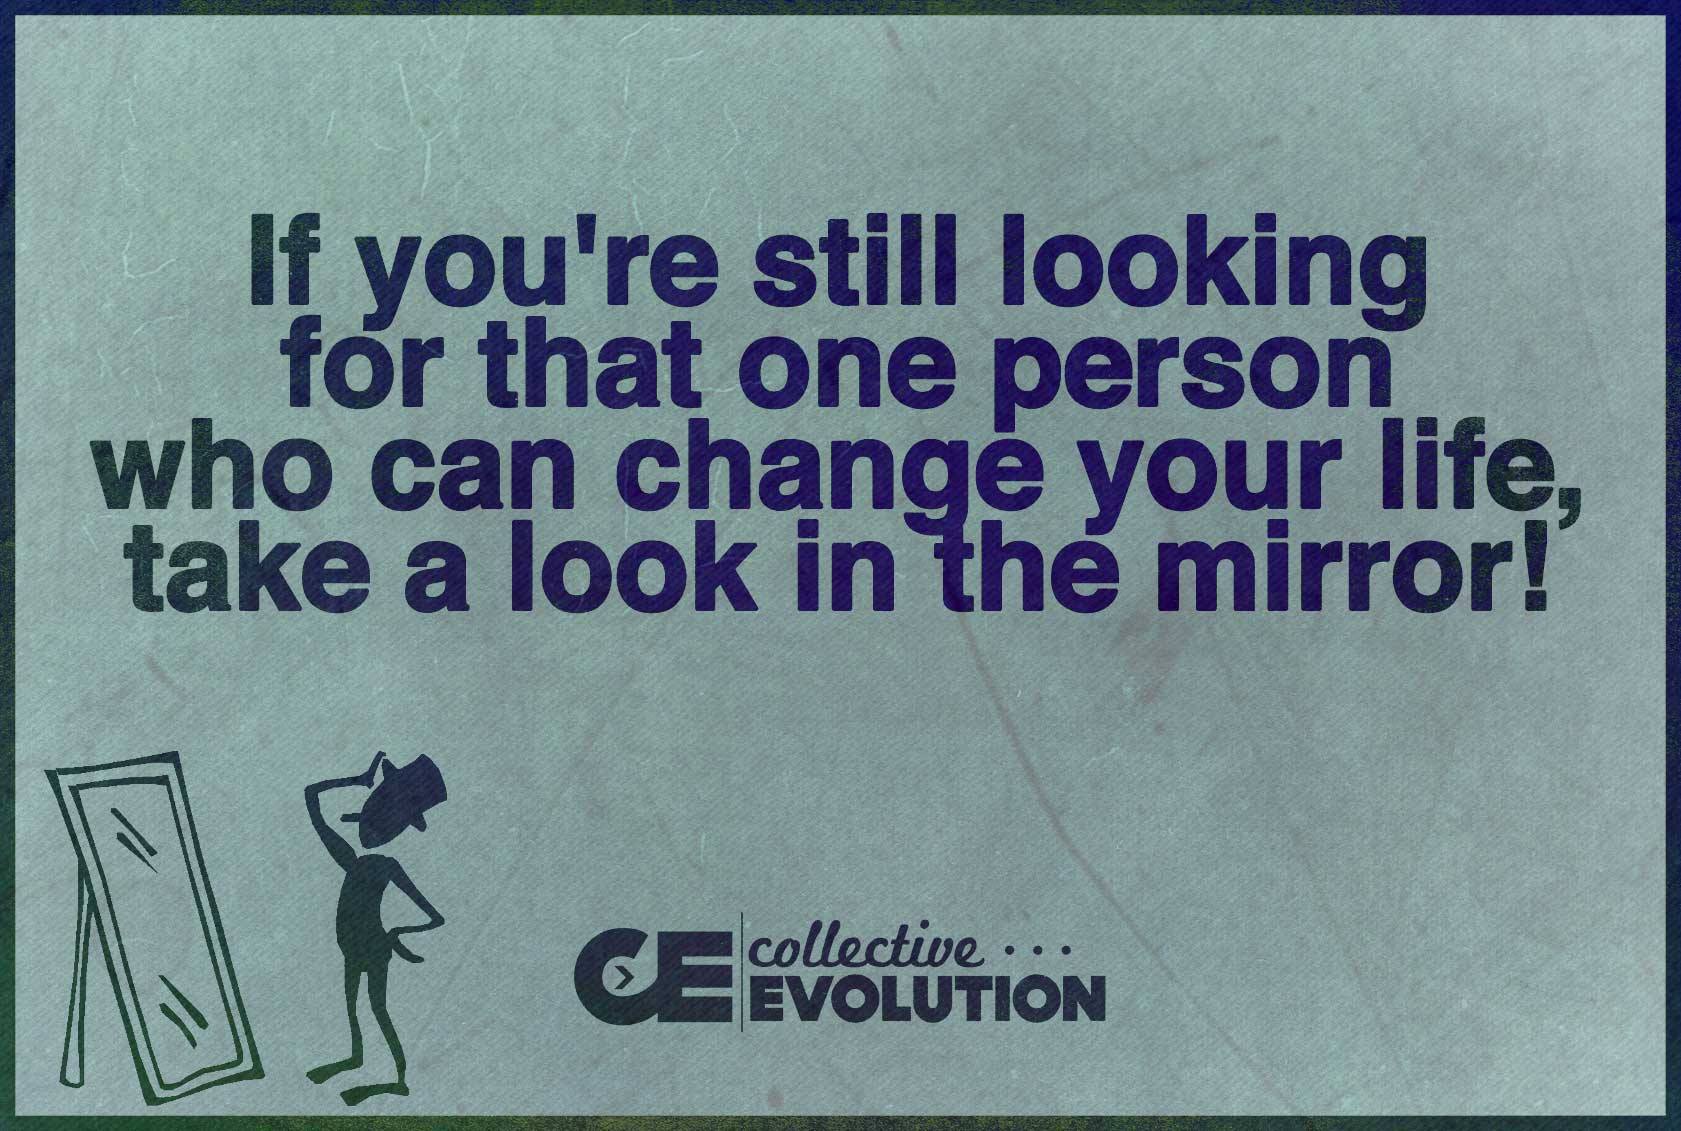 if you're still looking for that one person who can change your life, take a look in the mirror